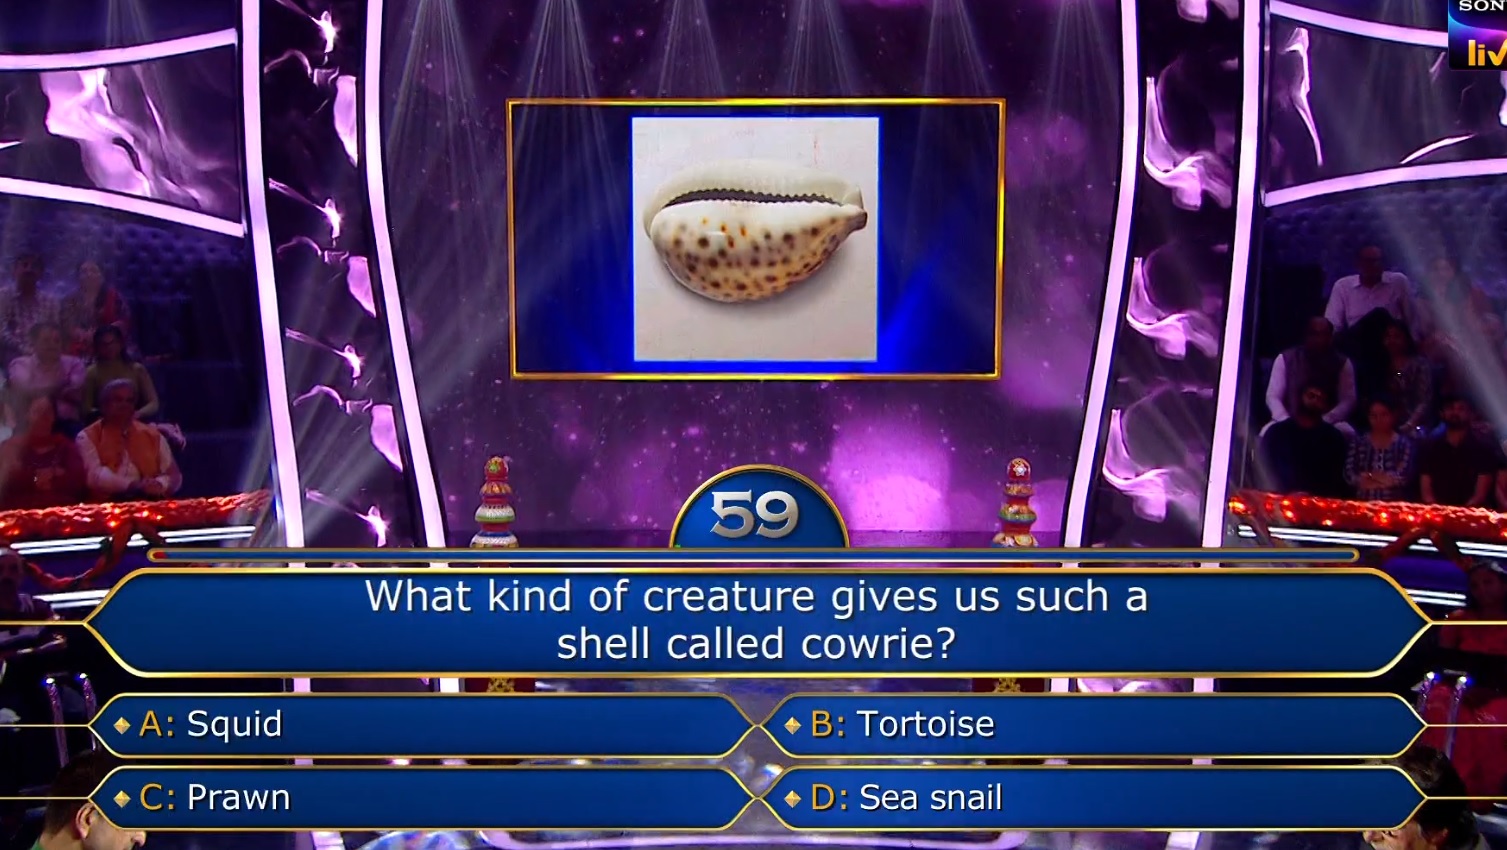 Ques : What kind of creature gives us such a shell called cowrie?